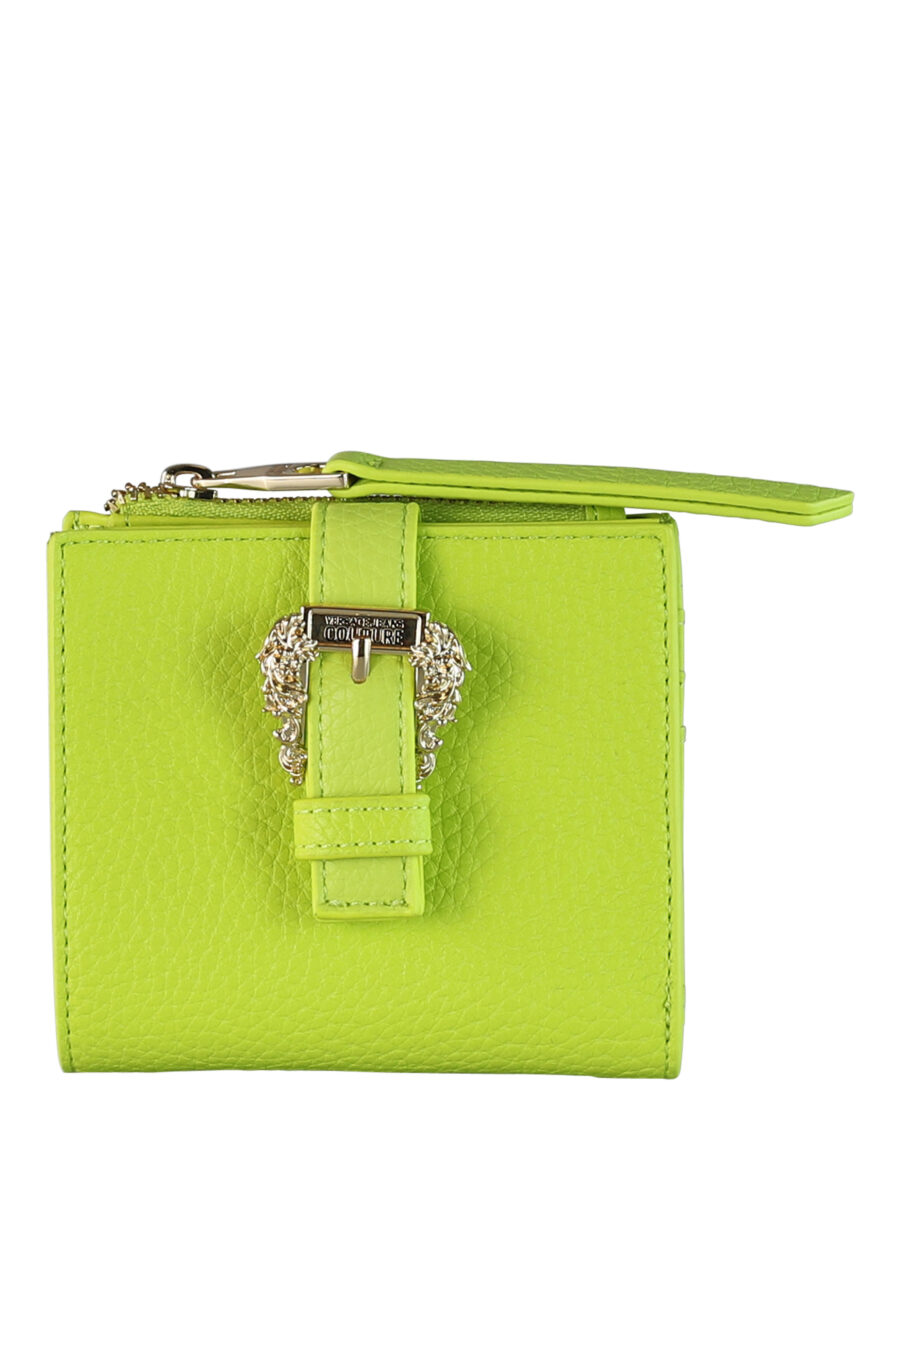 Green wallet with baroque buckle - IMG 0481